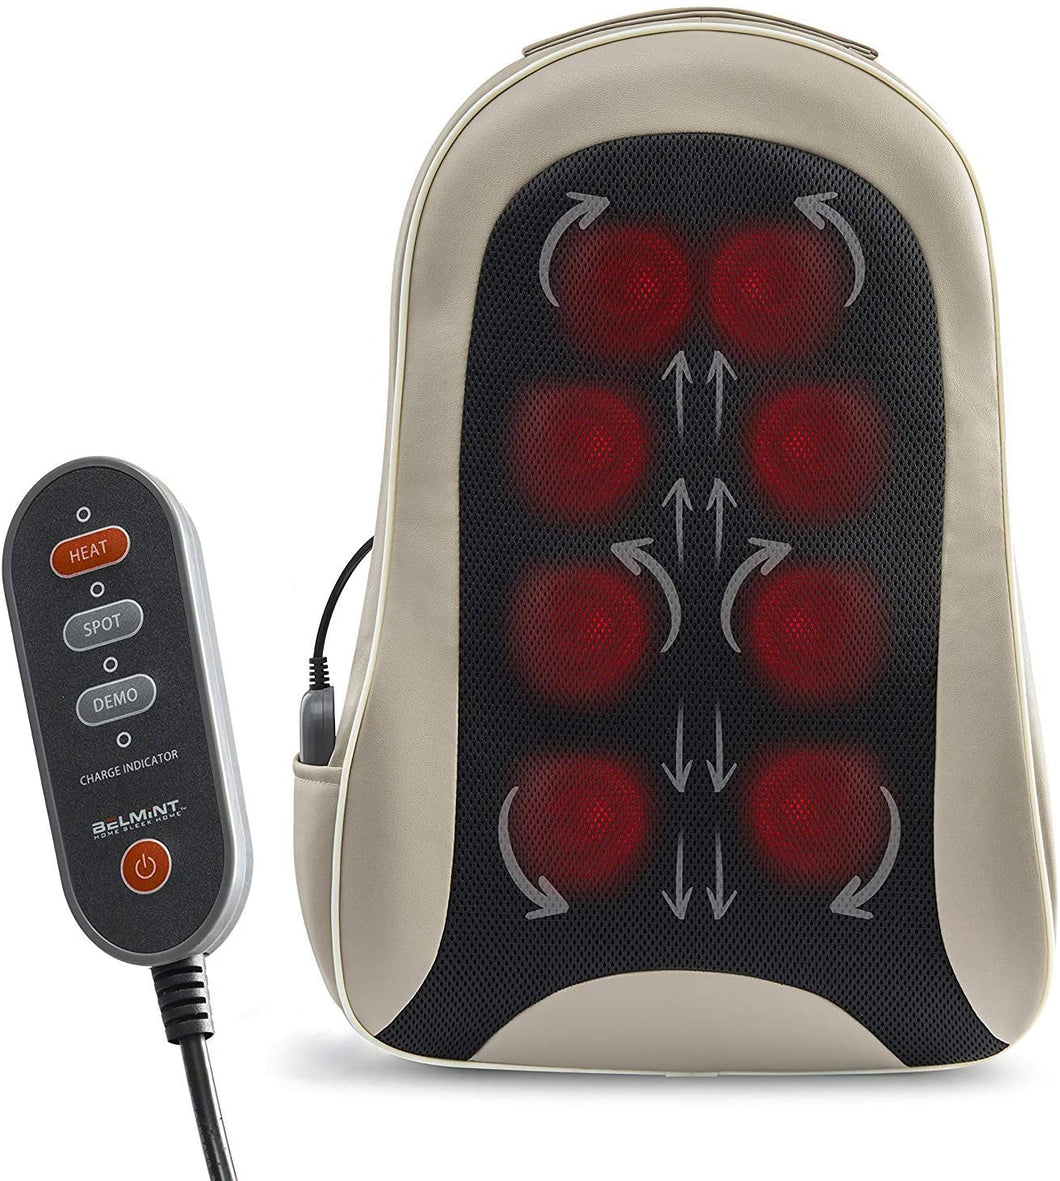 CORDLESS MASSAGER-Back Therapy New version with updated features